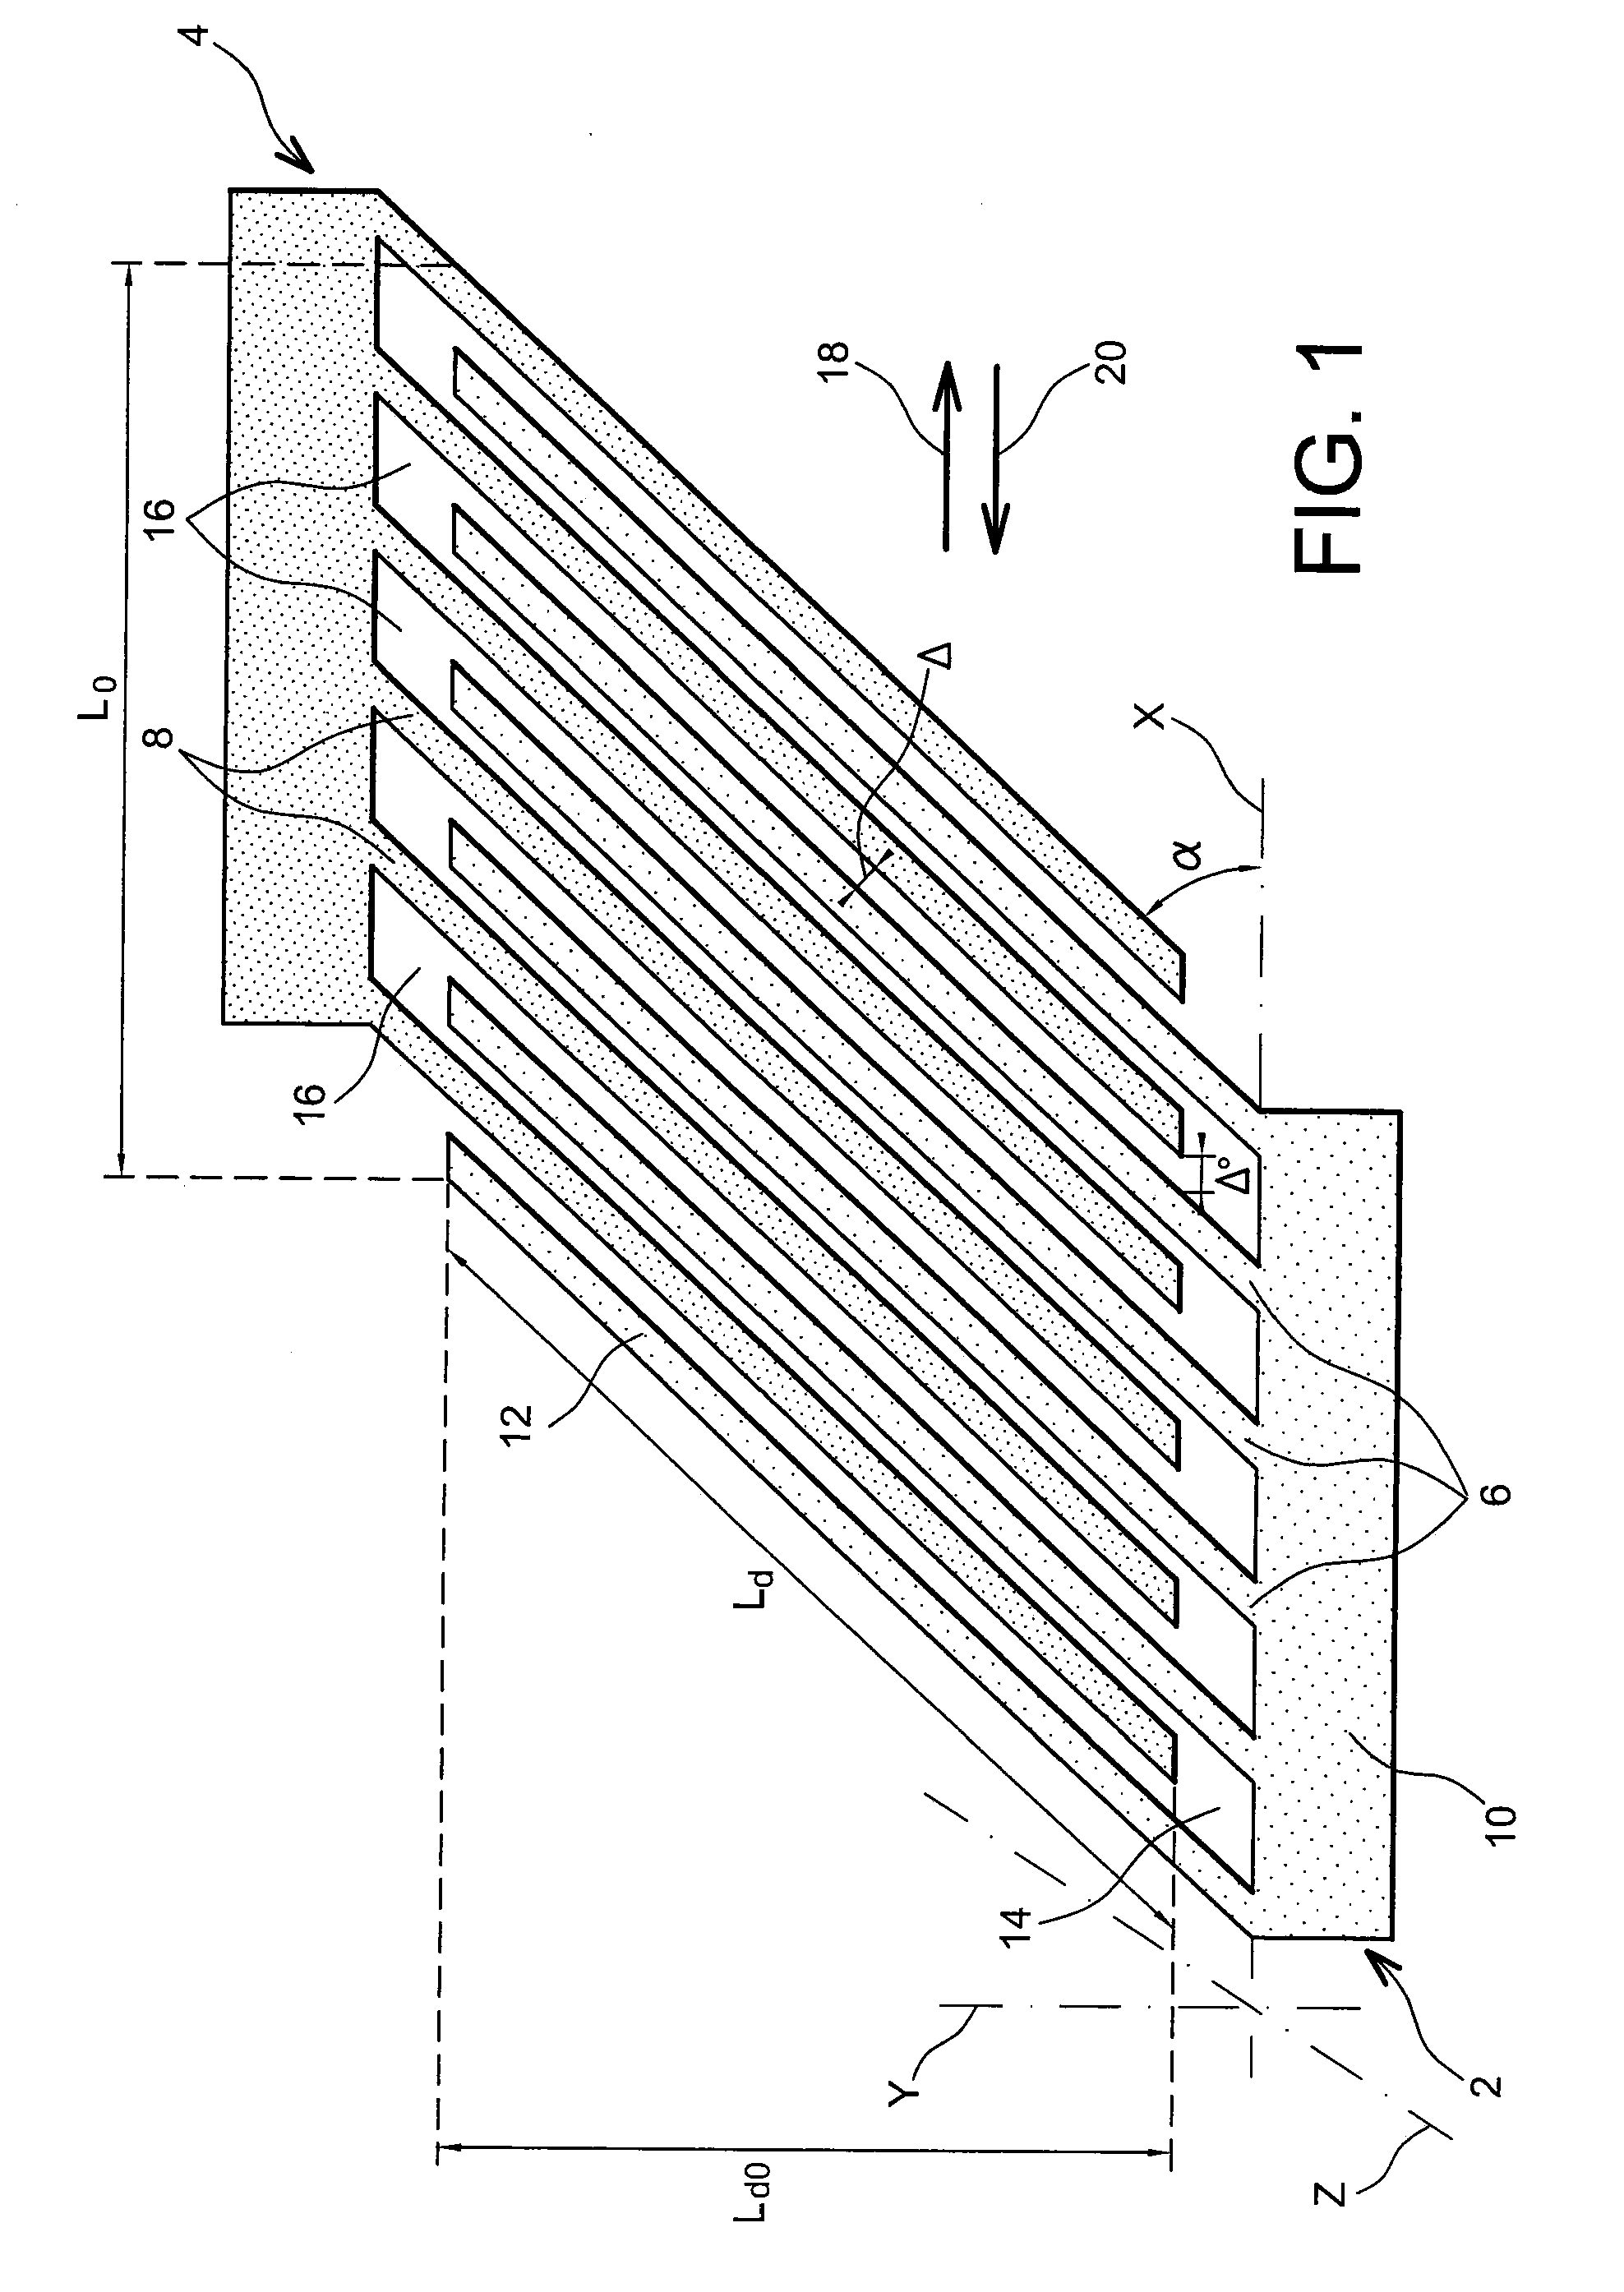 Device with Optimised Capacitive Volume